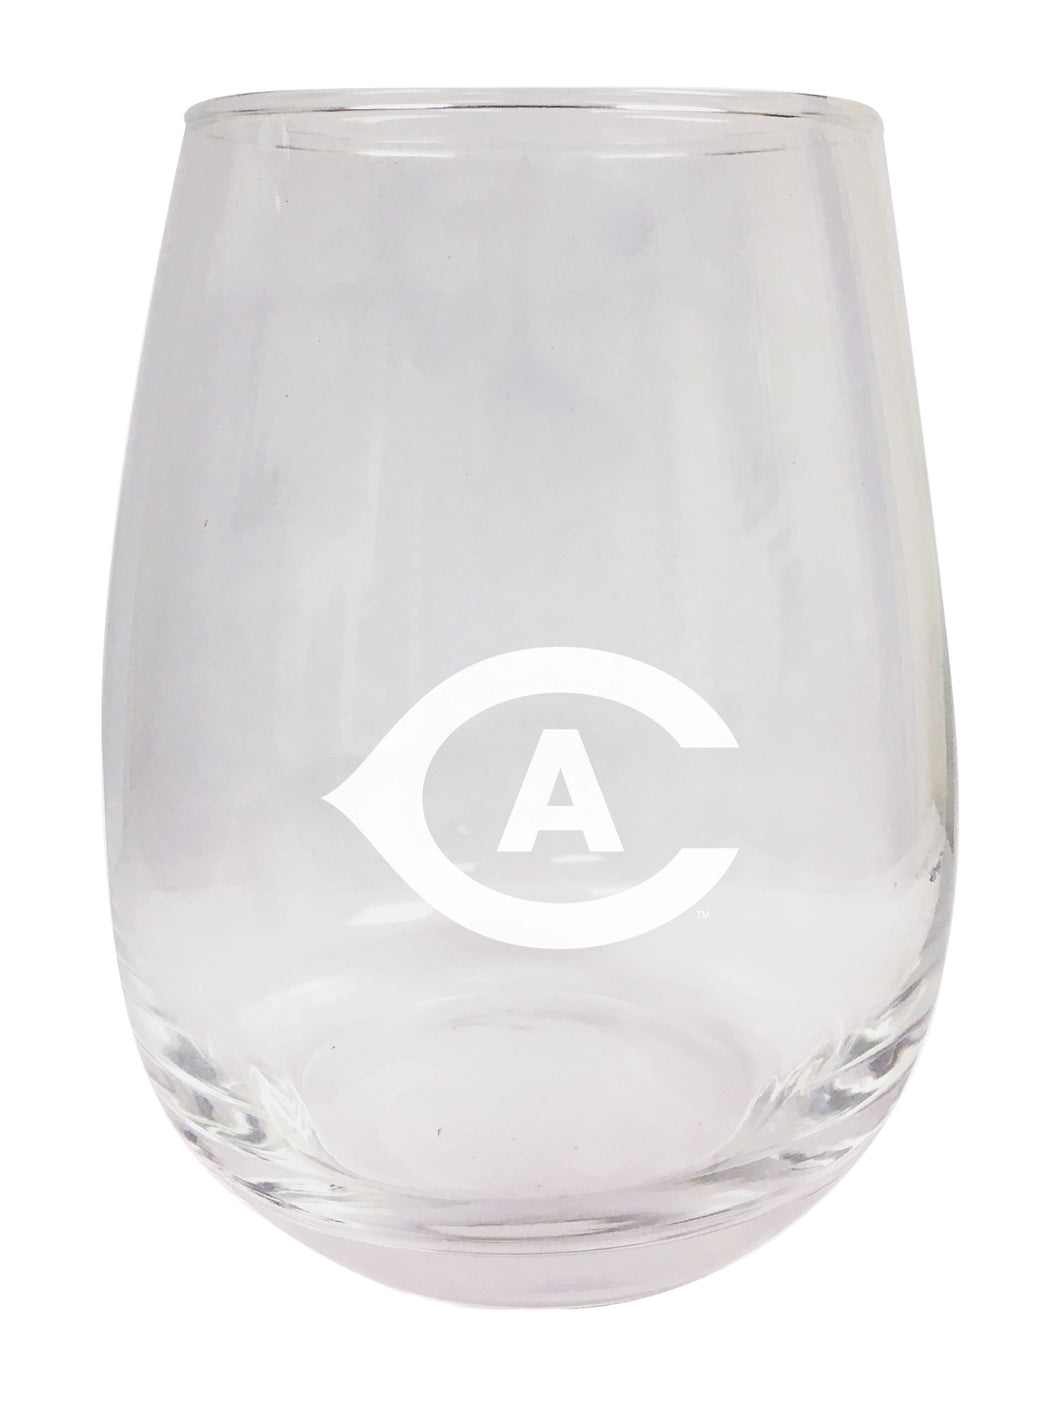 UC Davis Aggies NCAA 15 oz Laser-Engraved Stemless Wine Glass - Perfect for Alumni & Fans